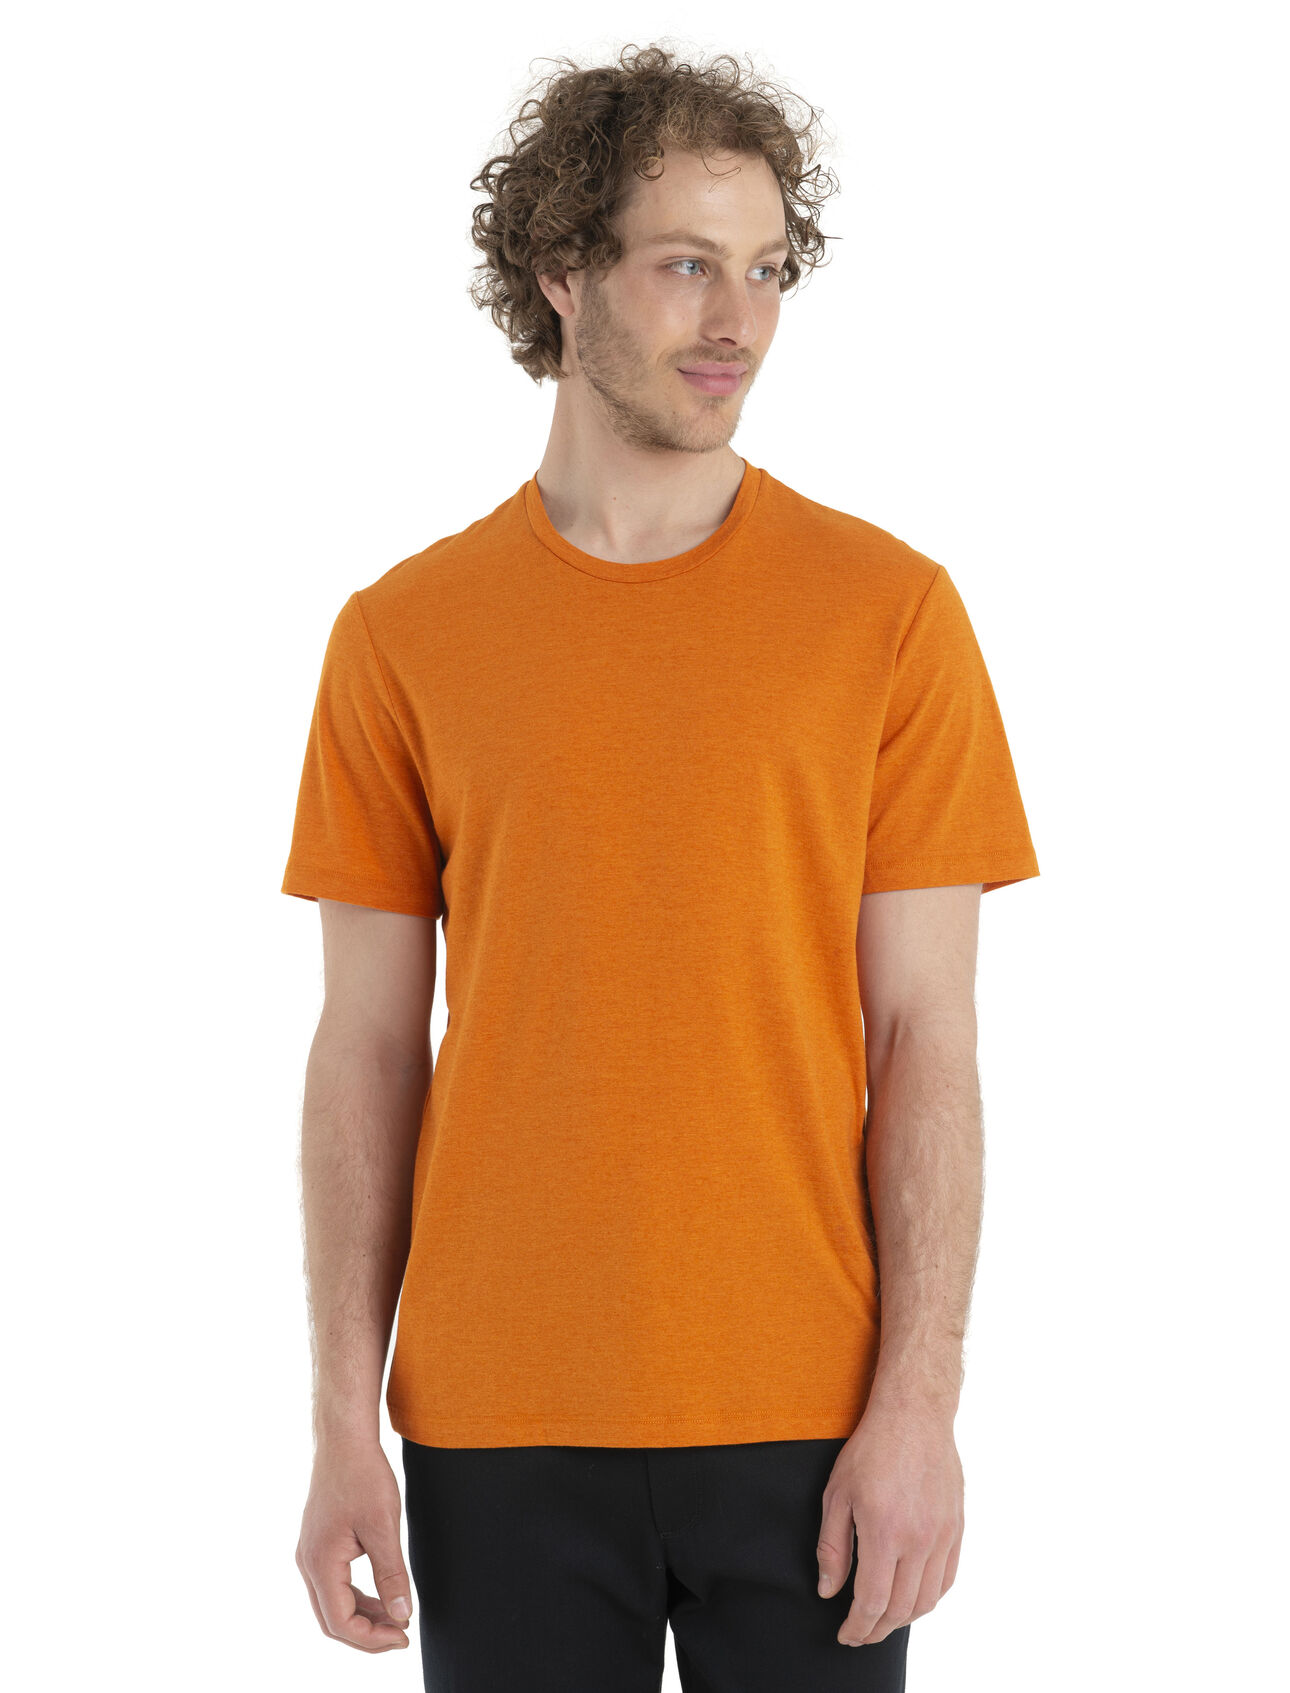 Mens Merino Central Classic Short Sleeve T-Shirt A versatile, everyday tee that goes anywhere in comfort, the Central Classic Short Sleeve Tee features a sustainable blend of natural merino wool and soft organically grown cotton.